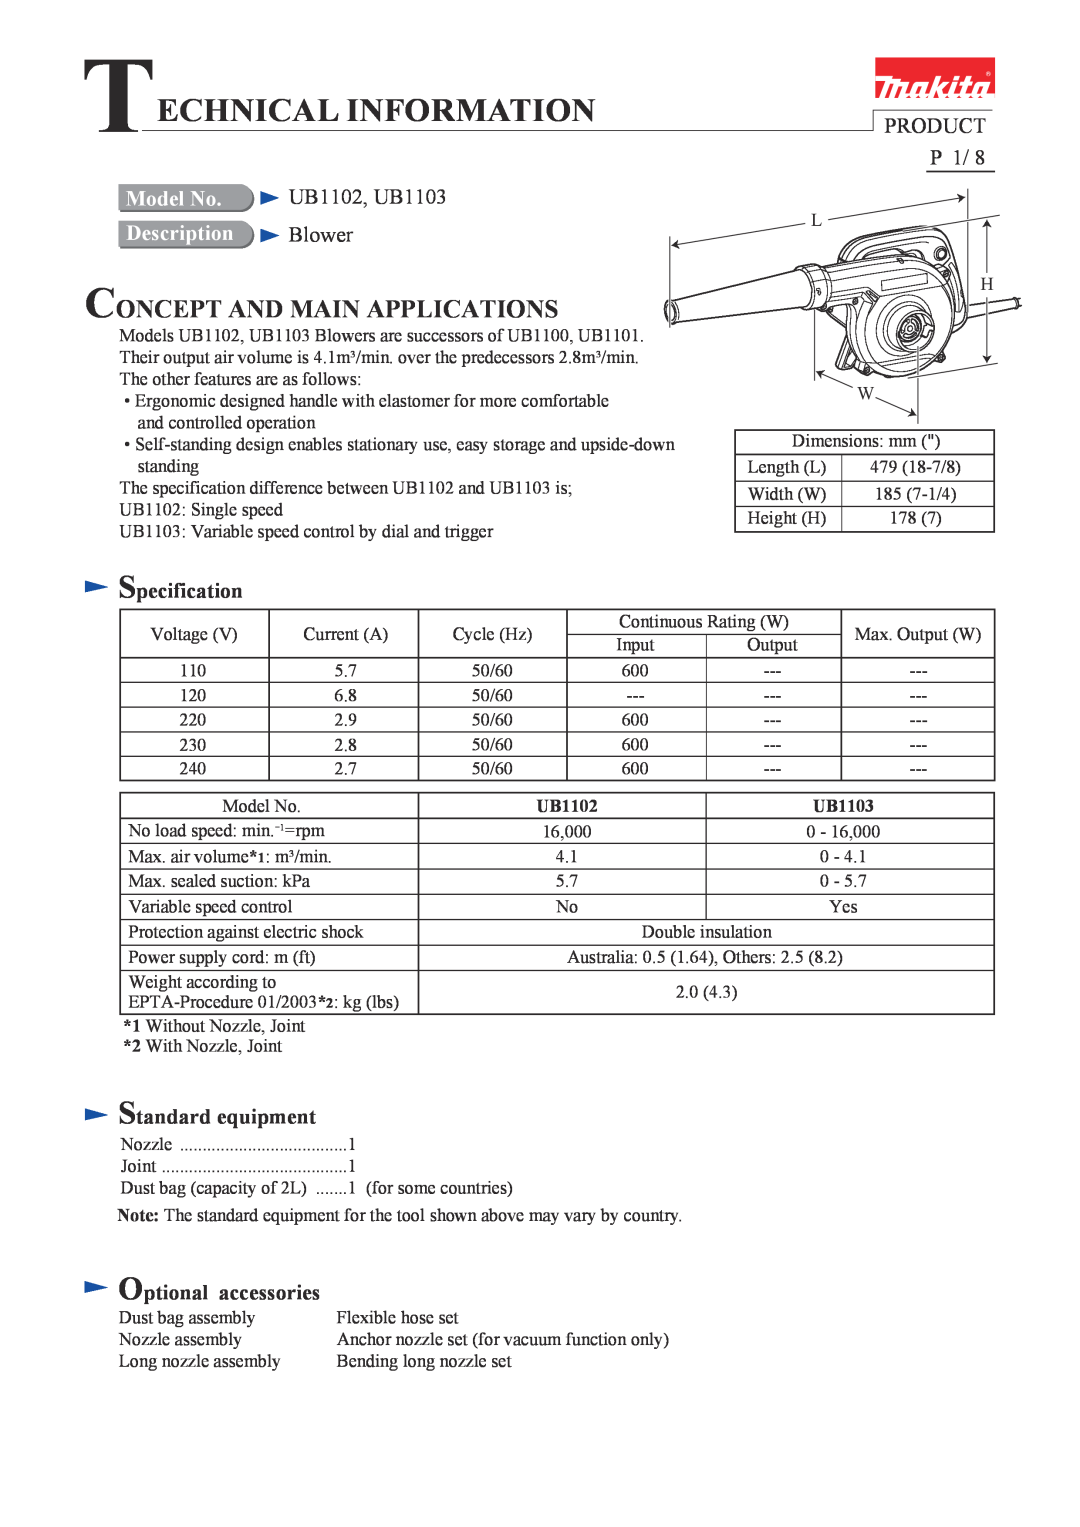 Makita dimensions Product, UB1102, UB1103, Blower, Specification, Standard equipment, Optional accessories, Model No 